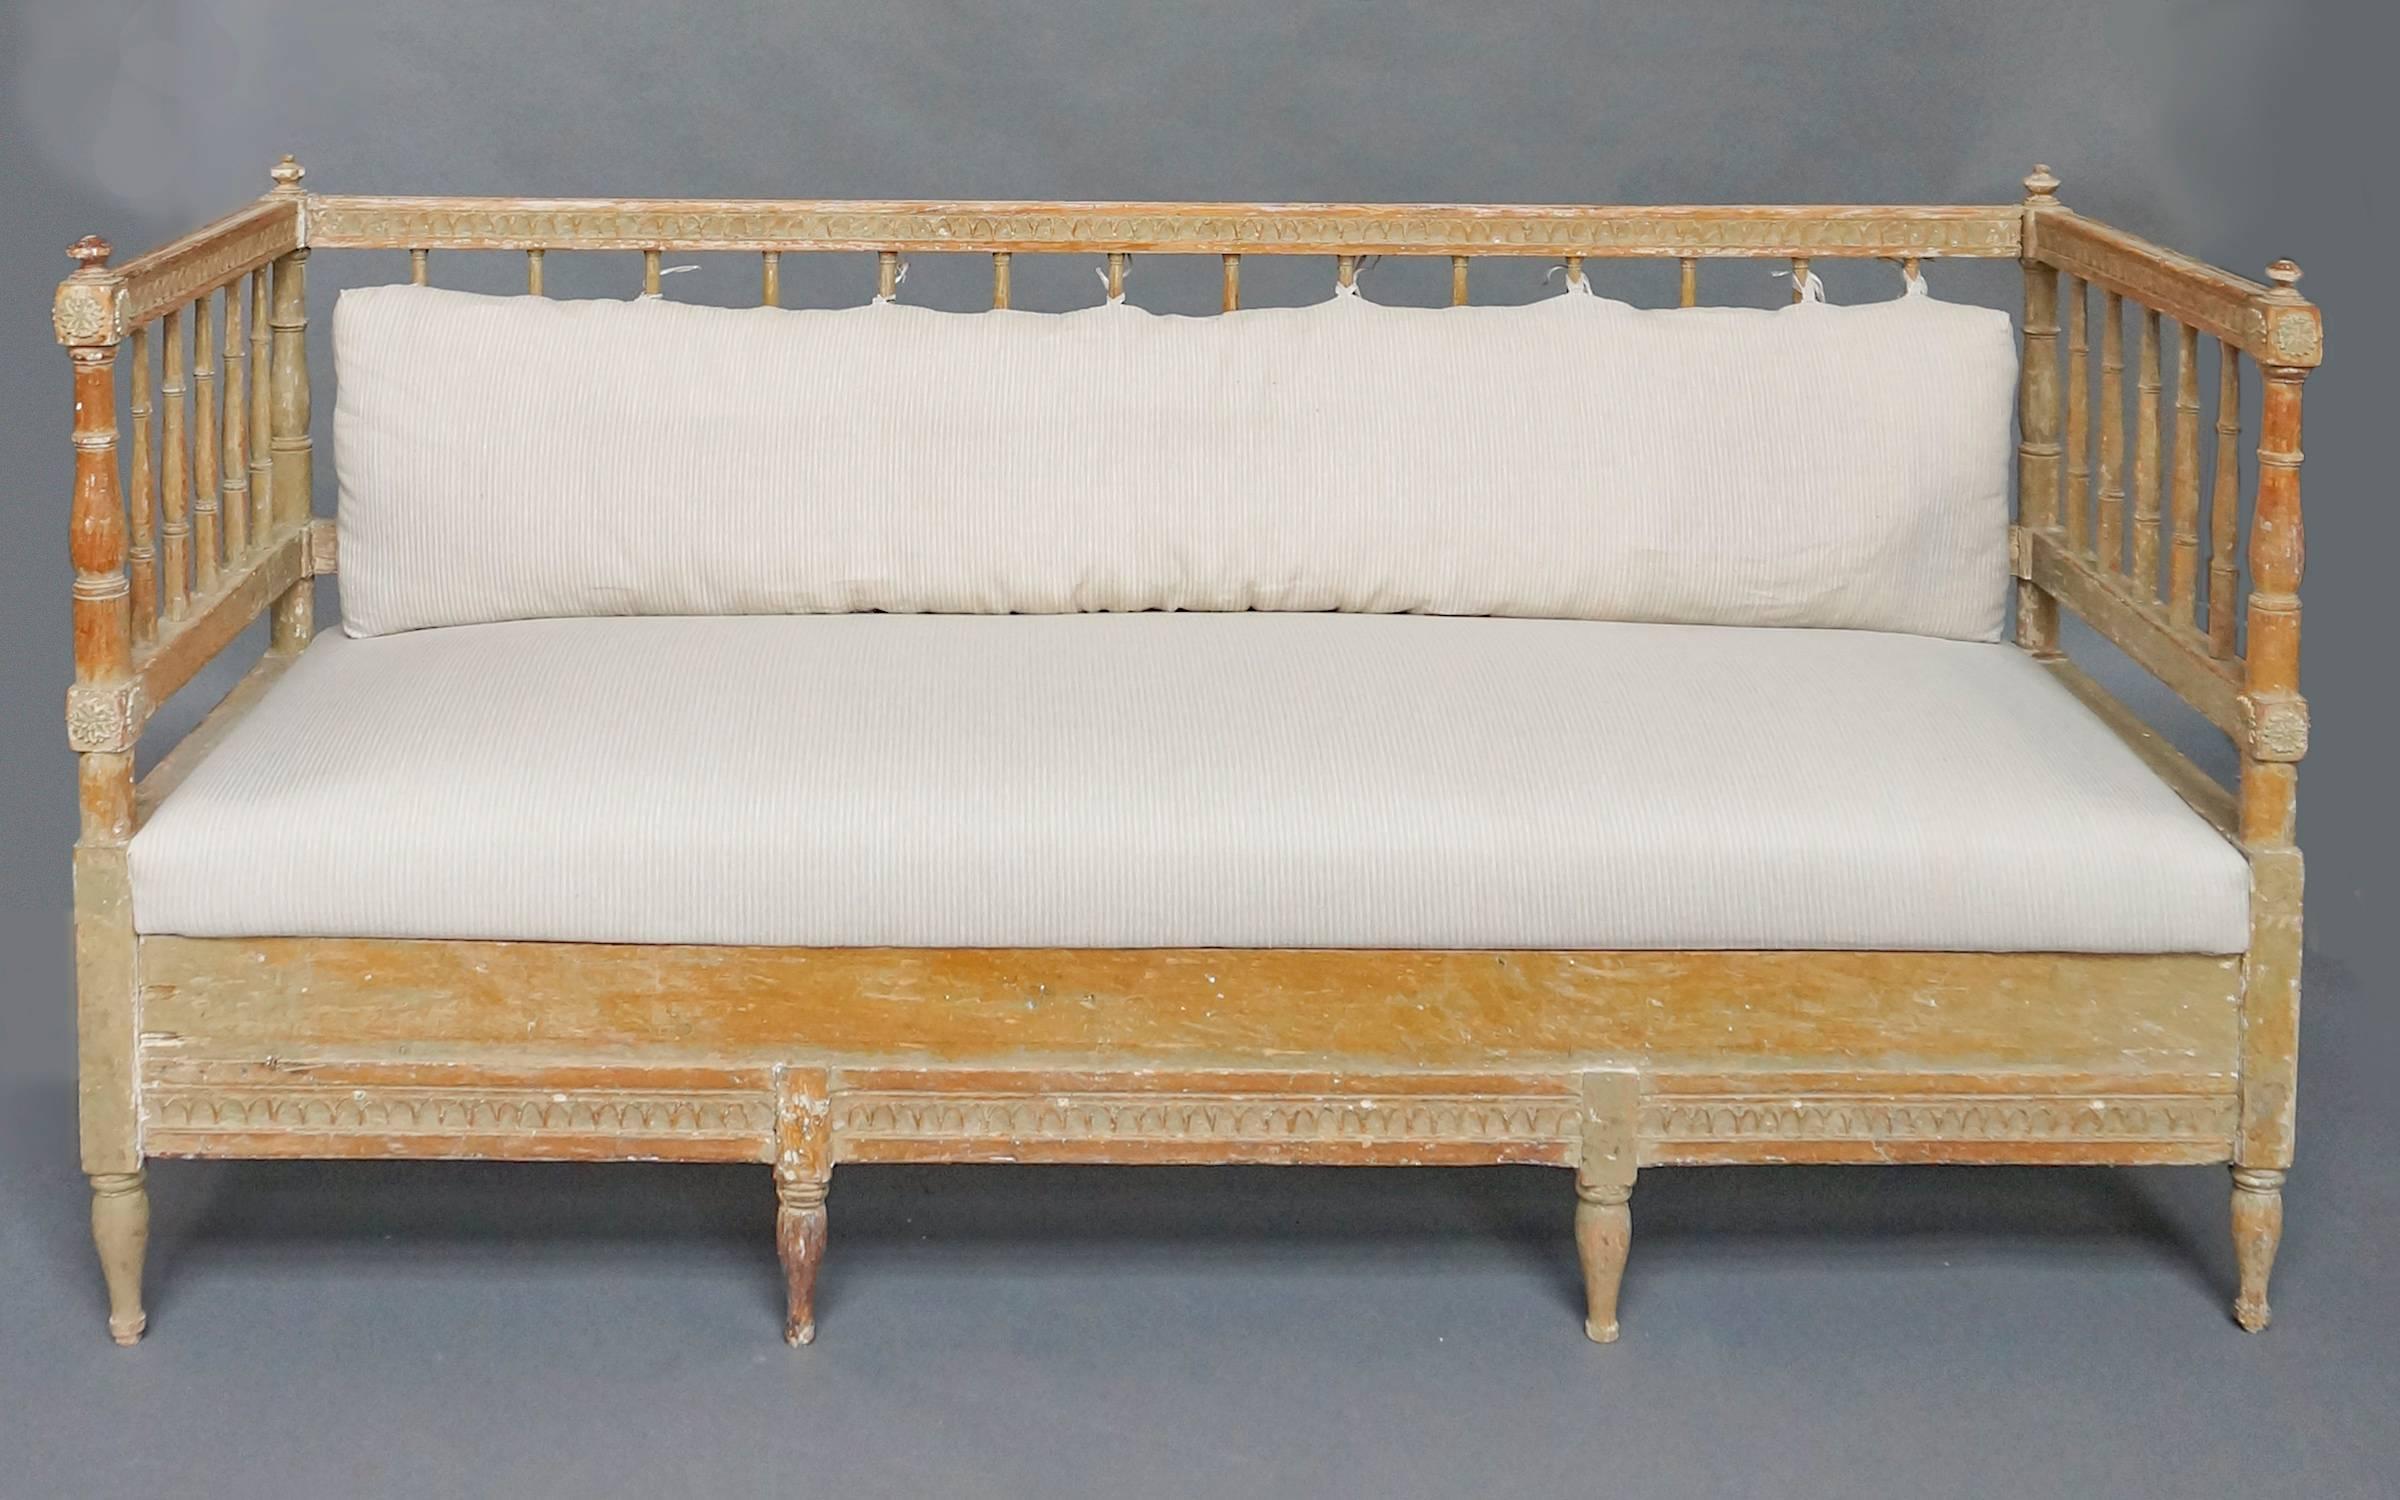 Gustavian sofa, Sweden circa 1800, with upholstered seat and open back and arms. Beautifully turned posts and spindles with hand-carved lambs tongue molding on the horizontal elements. The seat removes to reveal a storage space initially used for